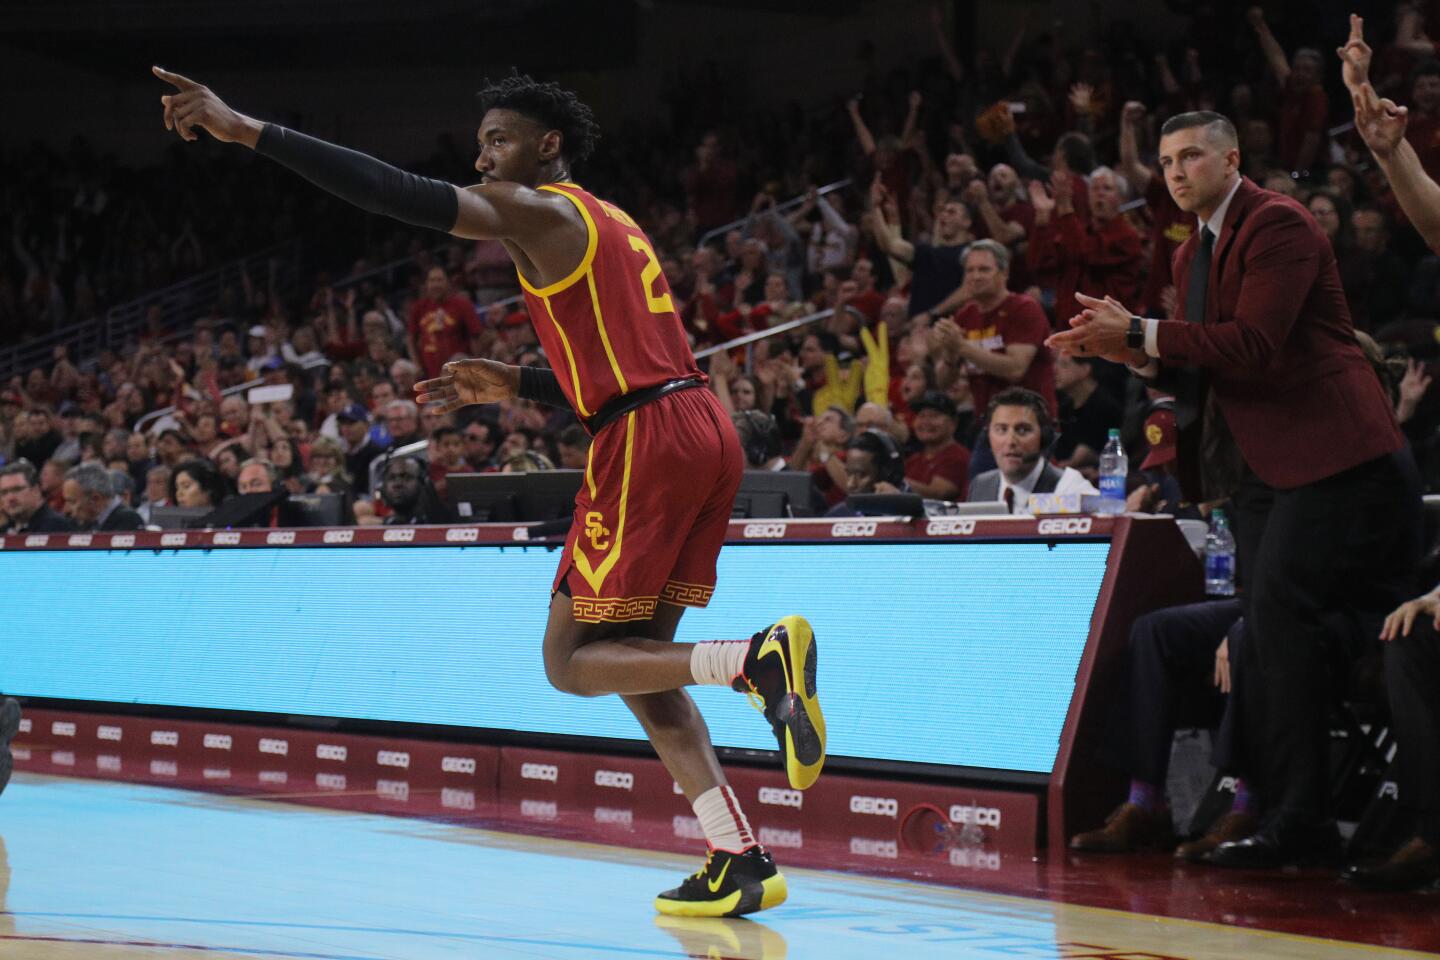 USC guard Jonah Mathews reacts after scoring one of his five three-pointers during the Trojans' 54-52 victory over UCLA at Galen Center on March 7, 2020.